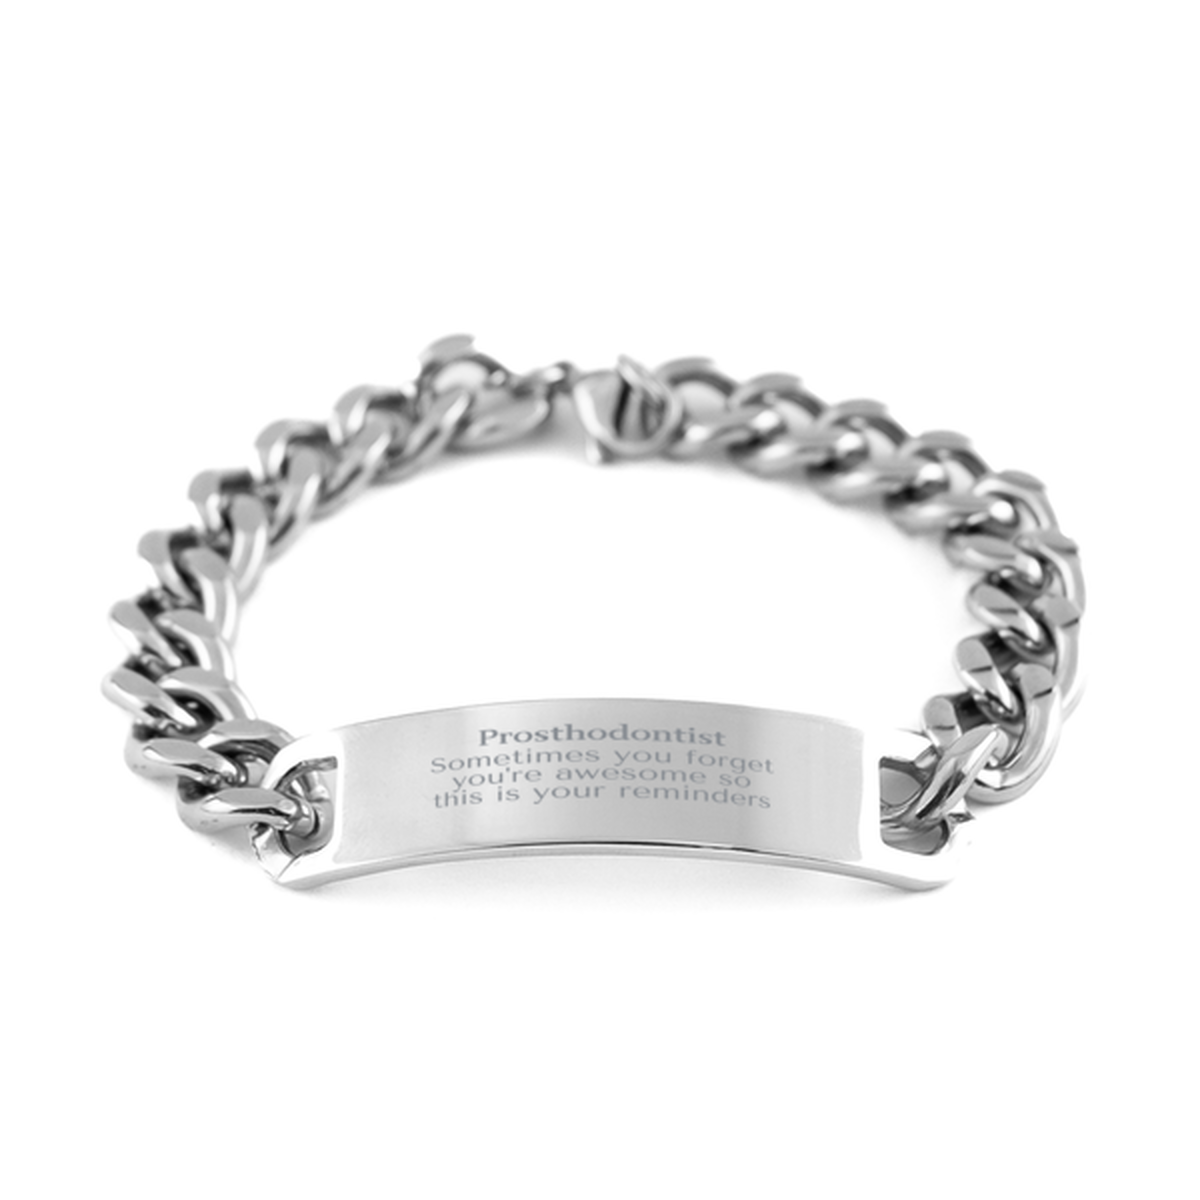 Sentimental Prosthodontist Cuban Chain Stainless Steel Bracelet, Prosthodontist Sometimes you forget you're awesome so this is your reminders, Graduation Christmas Birthday Gifts for Prosthodontist, Men, Women, Coworkers